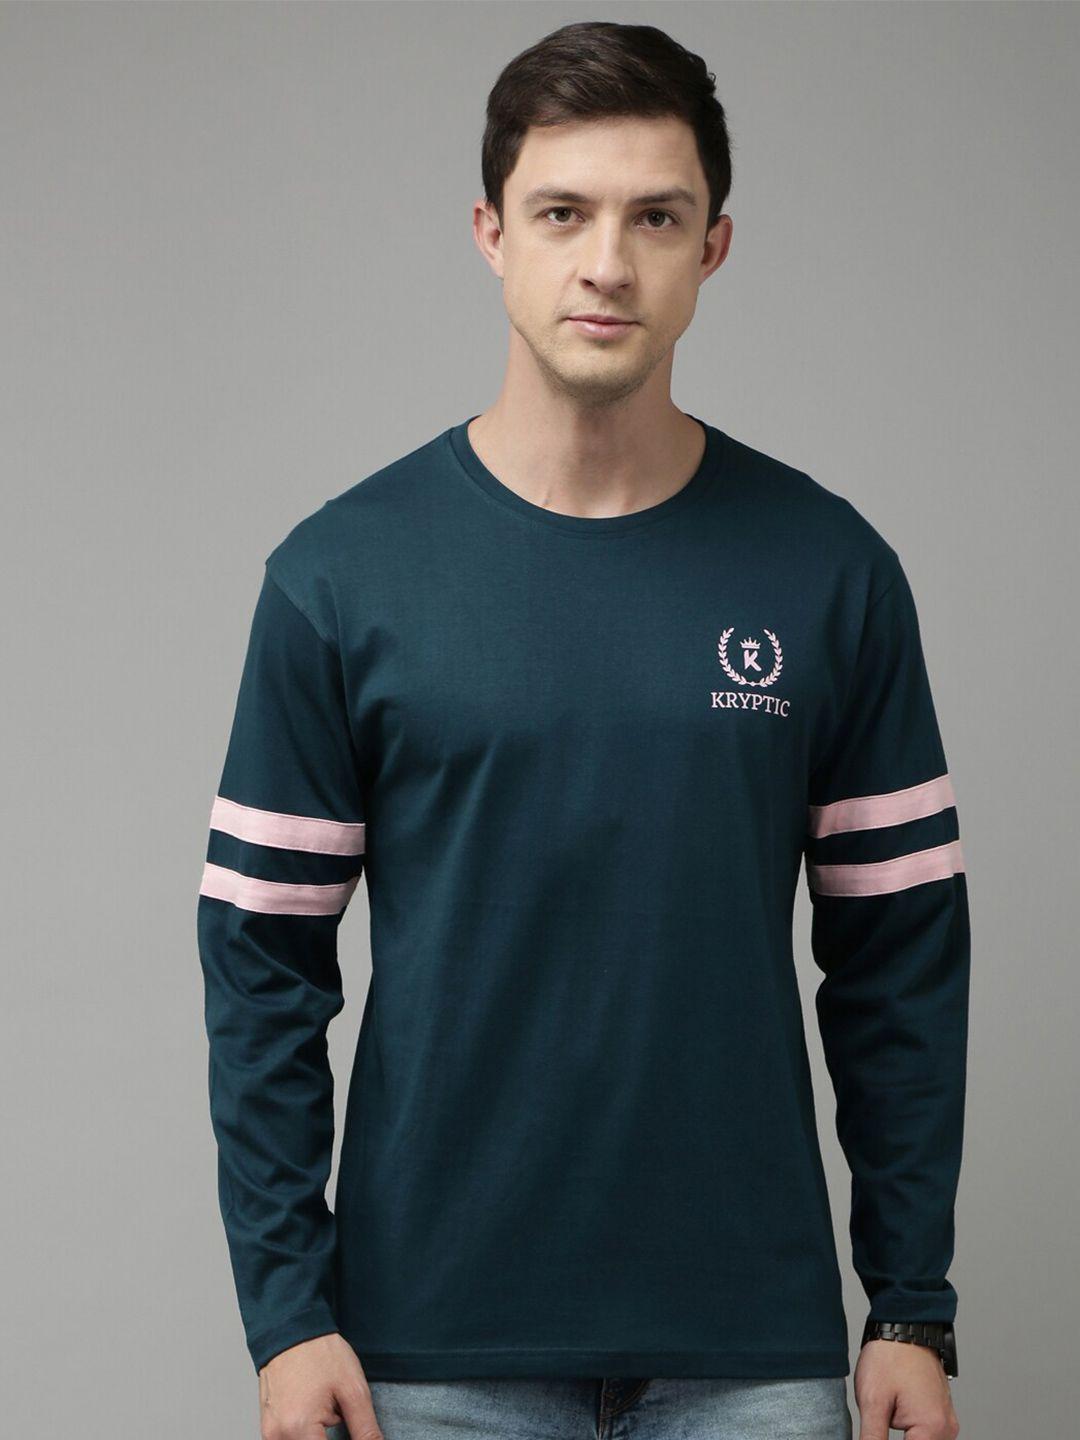 kryptic striped long sleeves cotton t-shirt